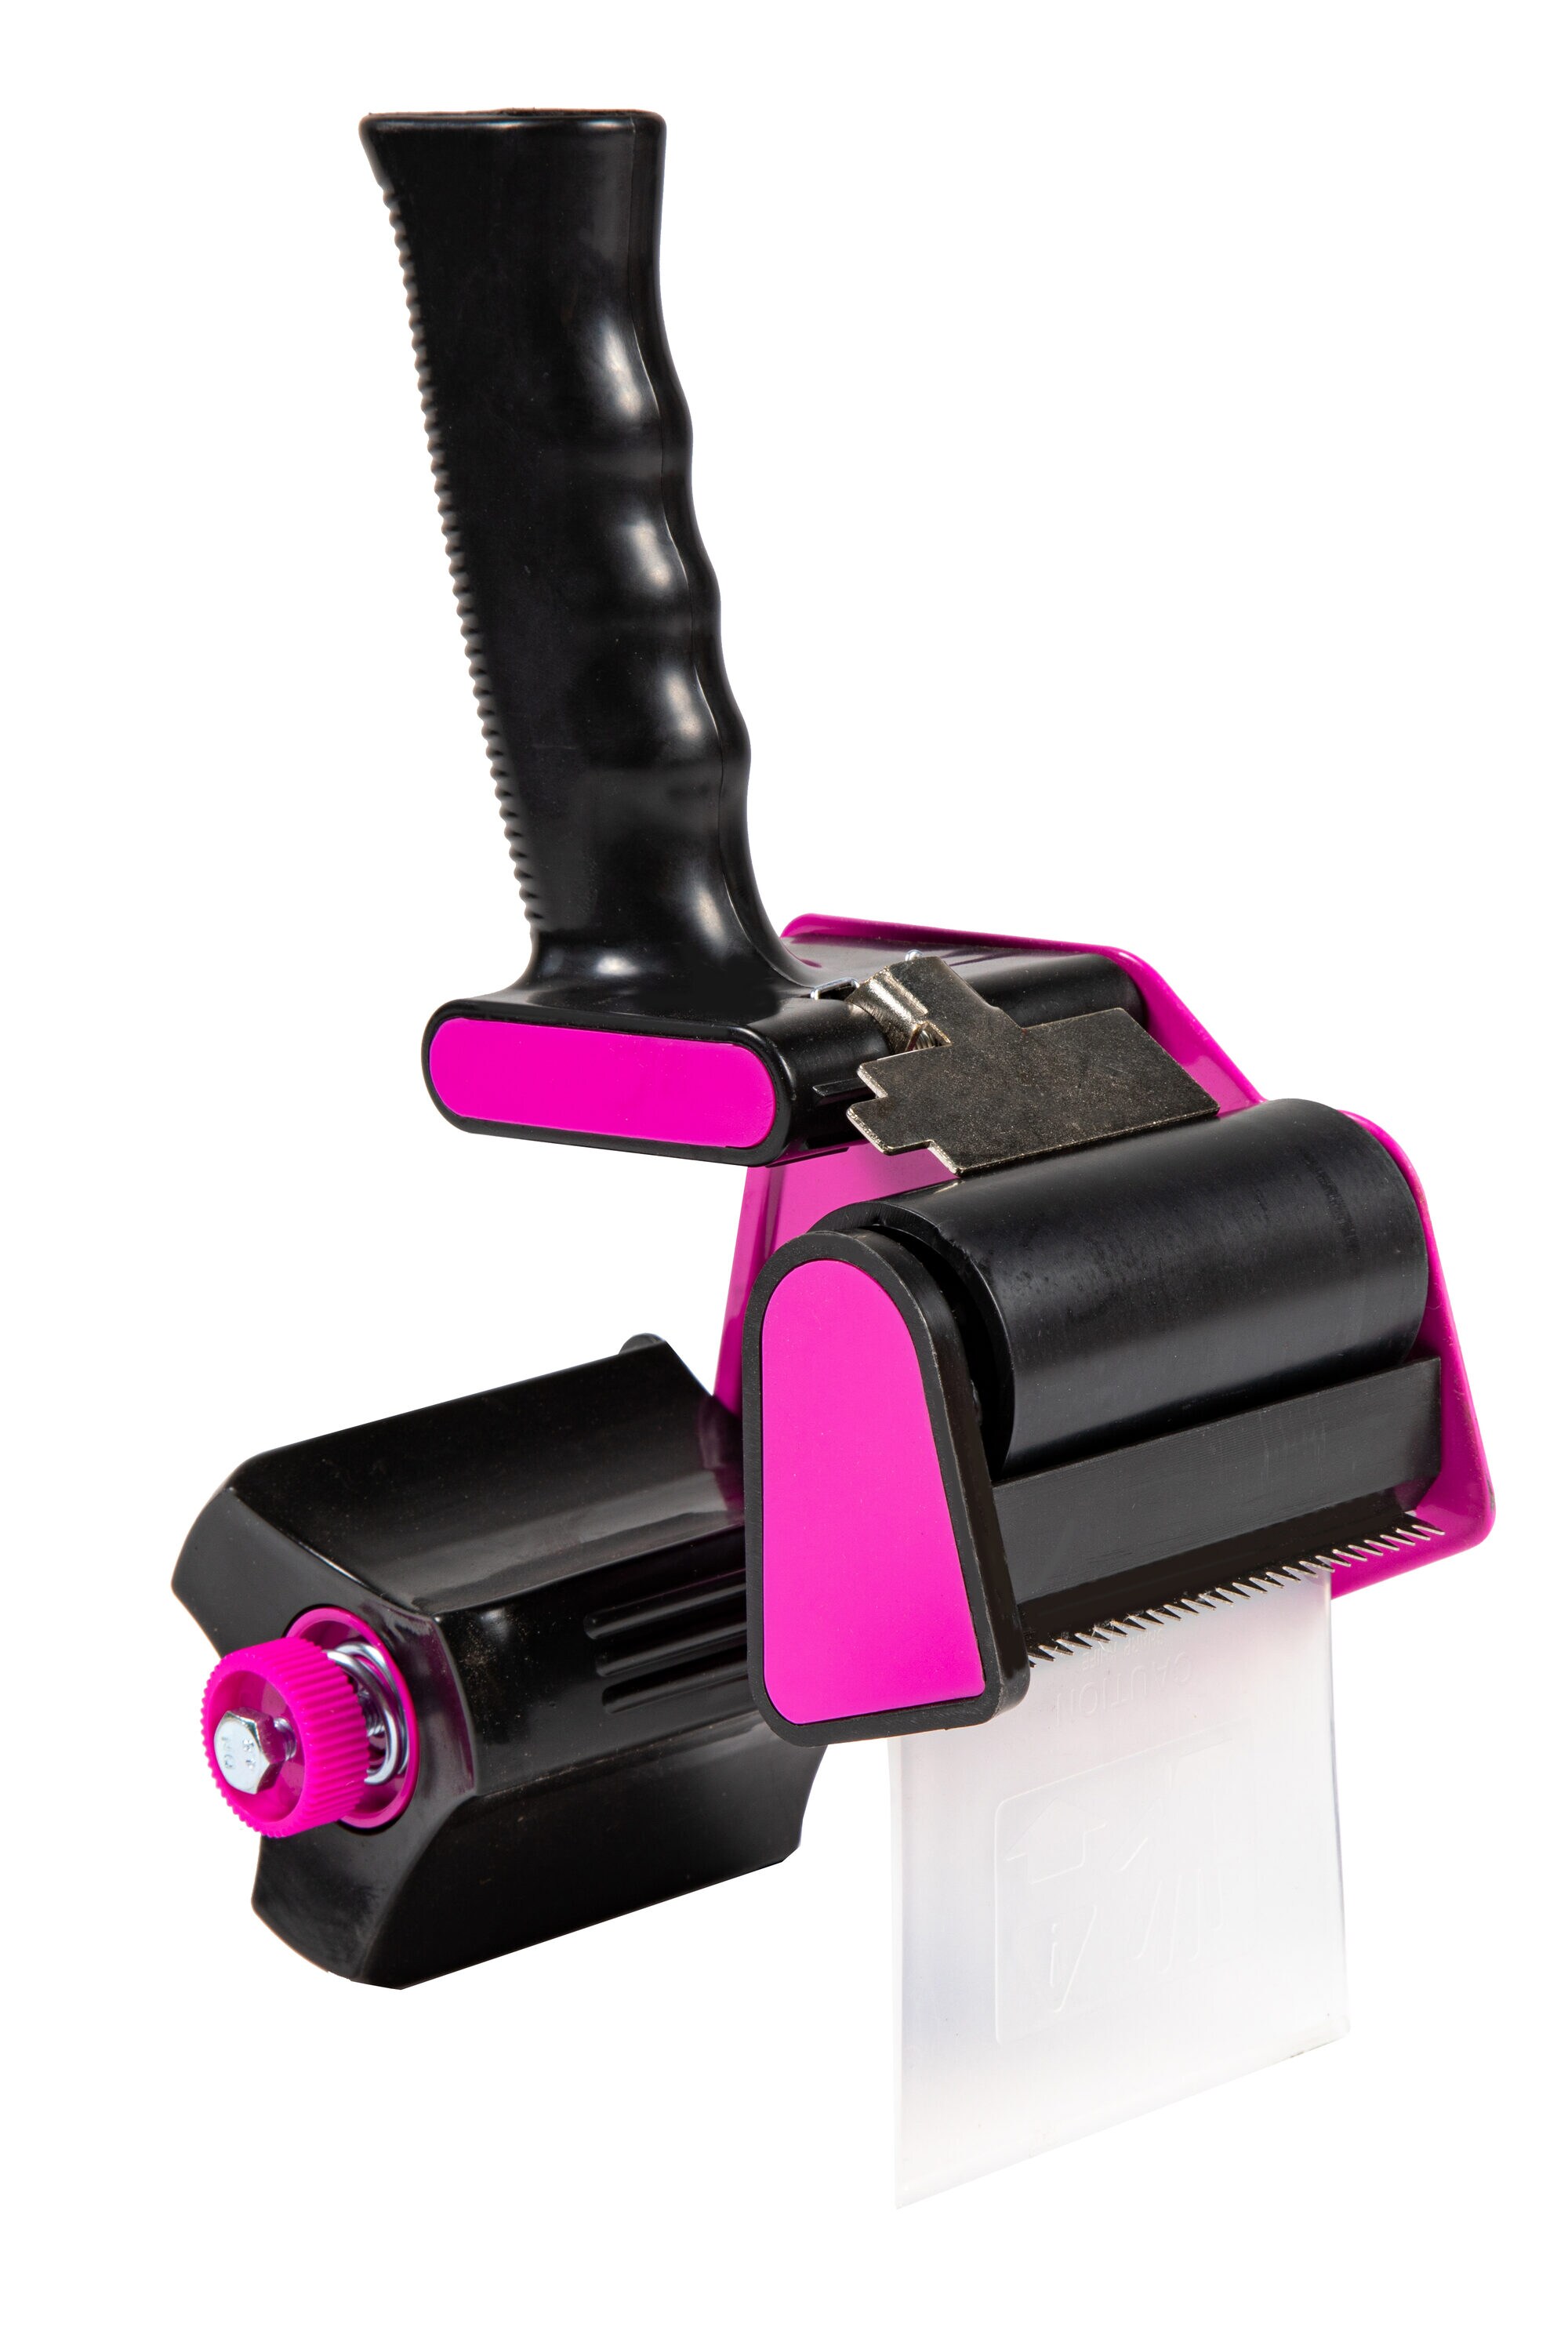 The Original Pink Box The Orignal Pink Box Packing Tape Gun Dispenser for 3-Inch Wide Tape, Pink